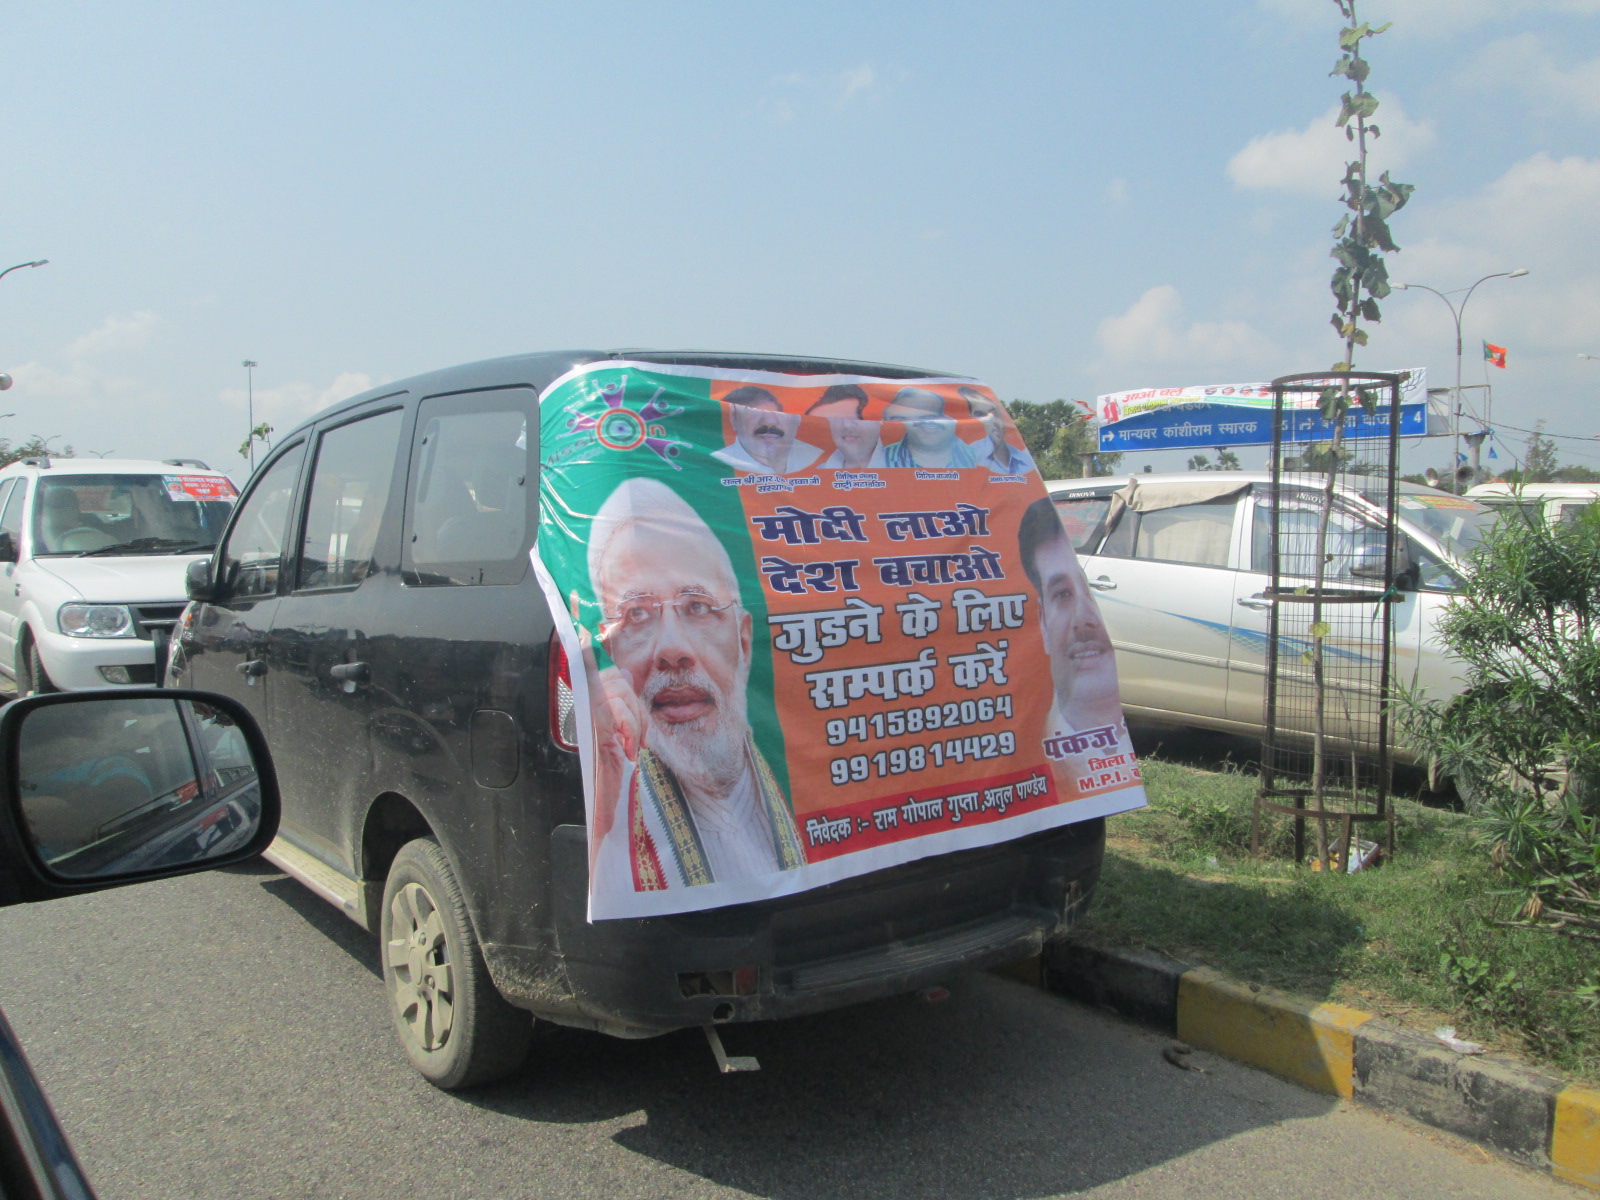 Modi supporters in Lucknow